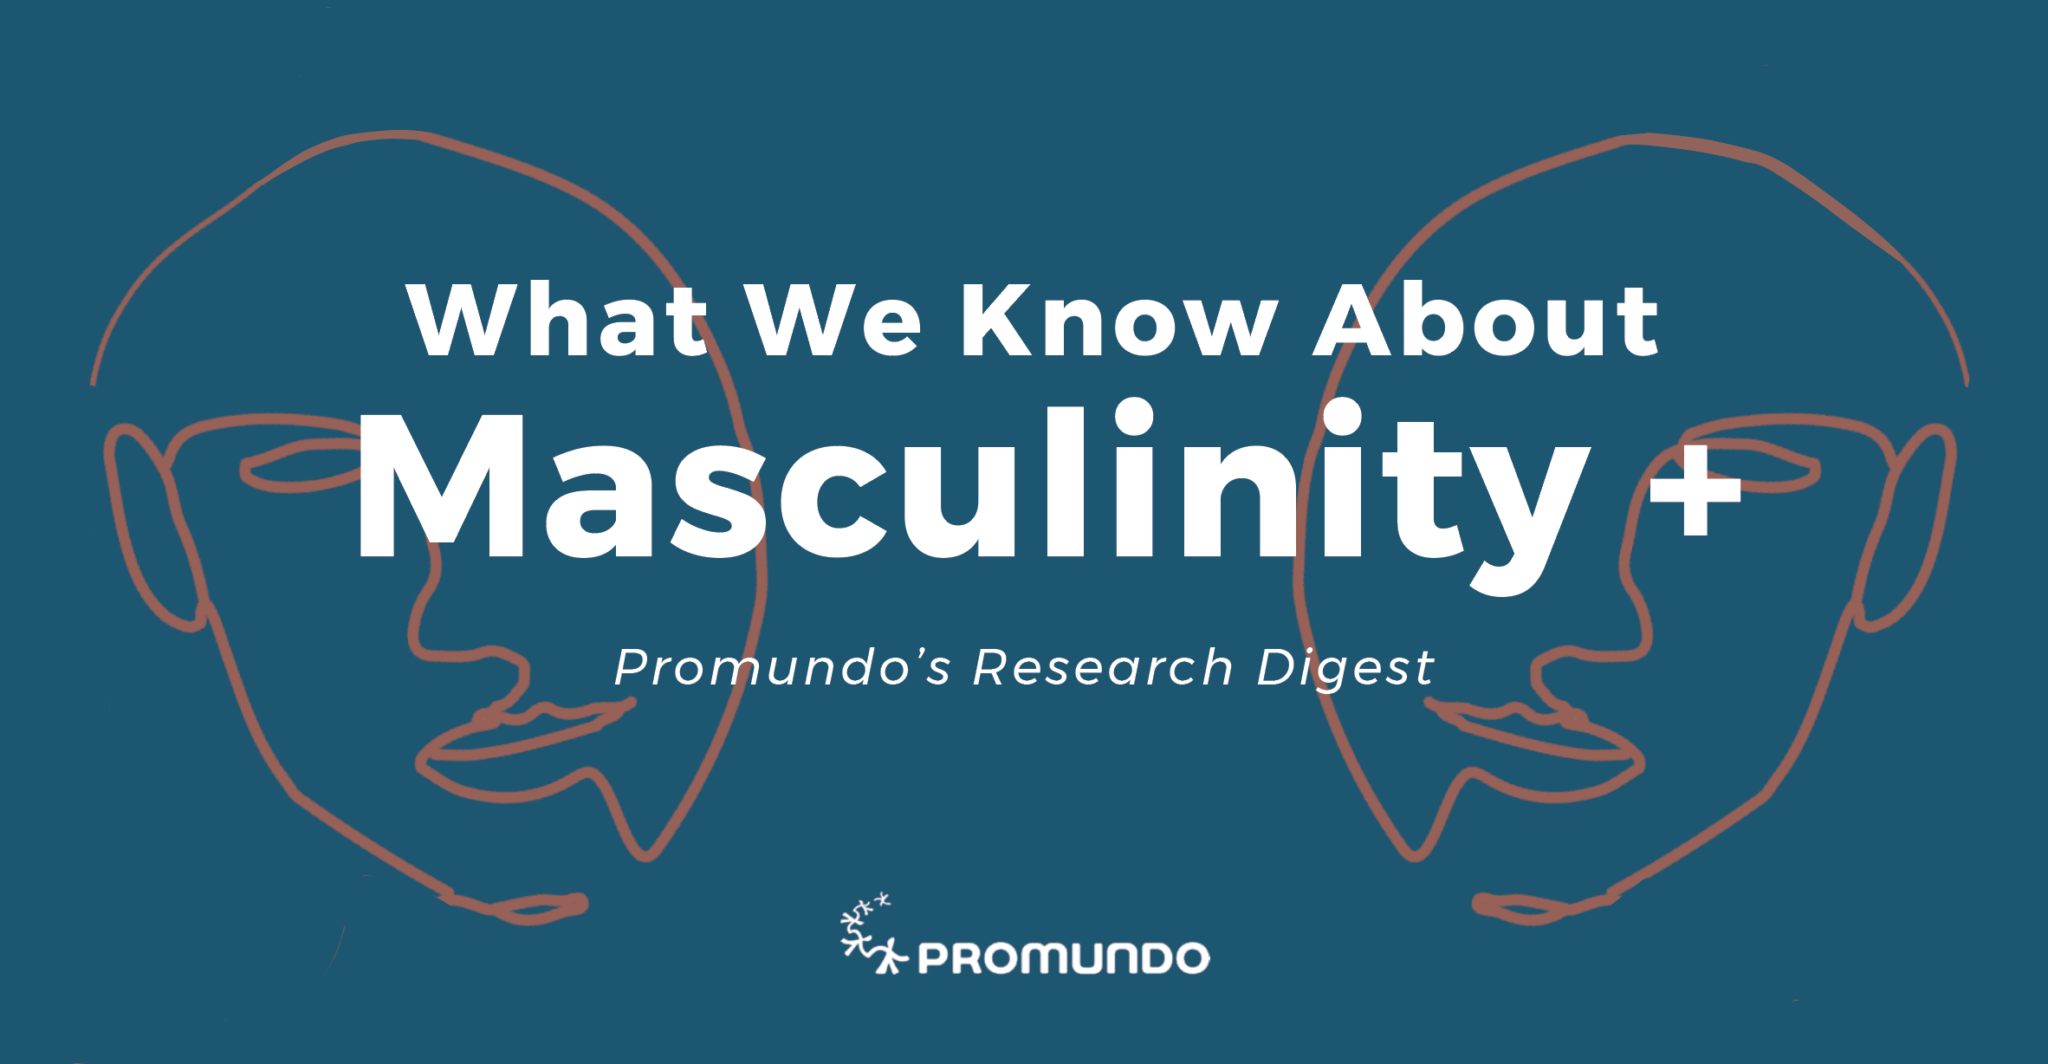 What We Know About Masculinity, Fatherhood, and Caregiving